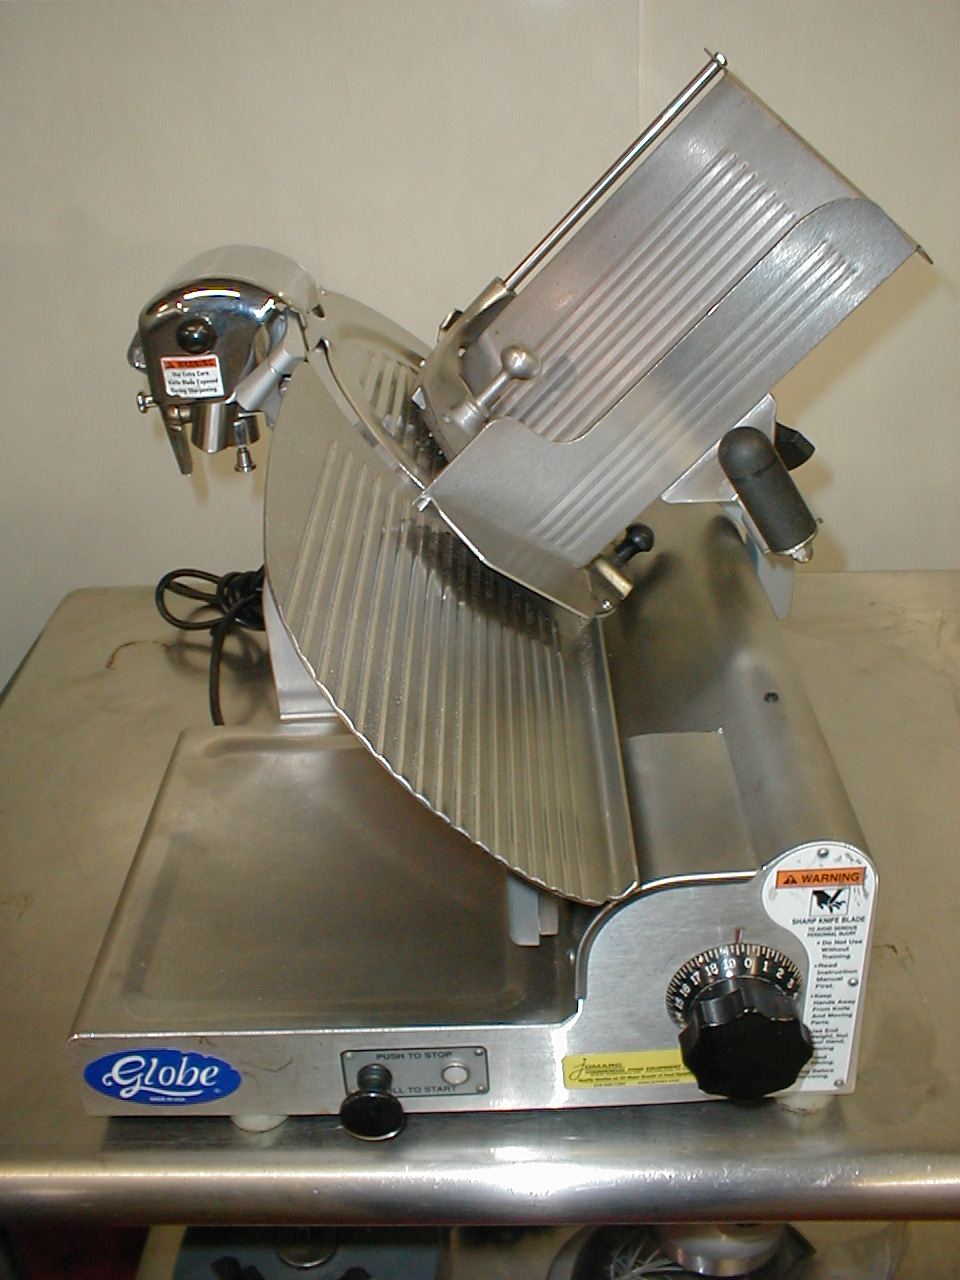 Real nice used globe slicer late model 3500 all stainless steel 